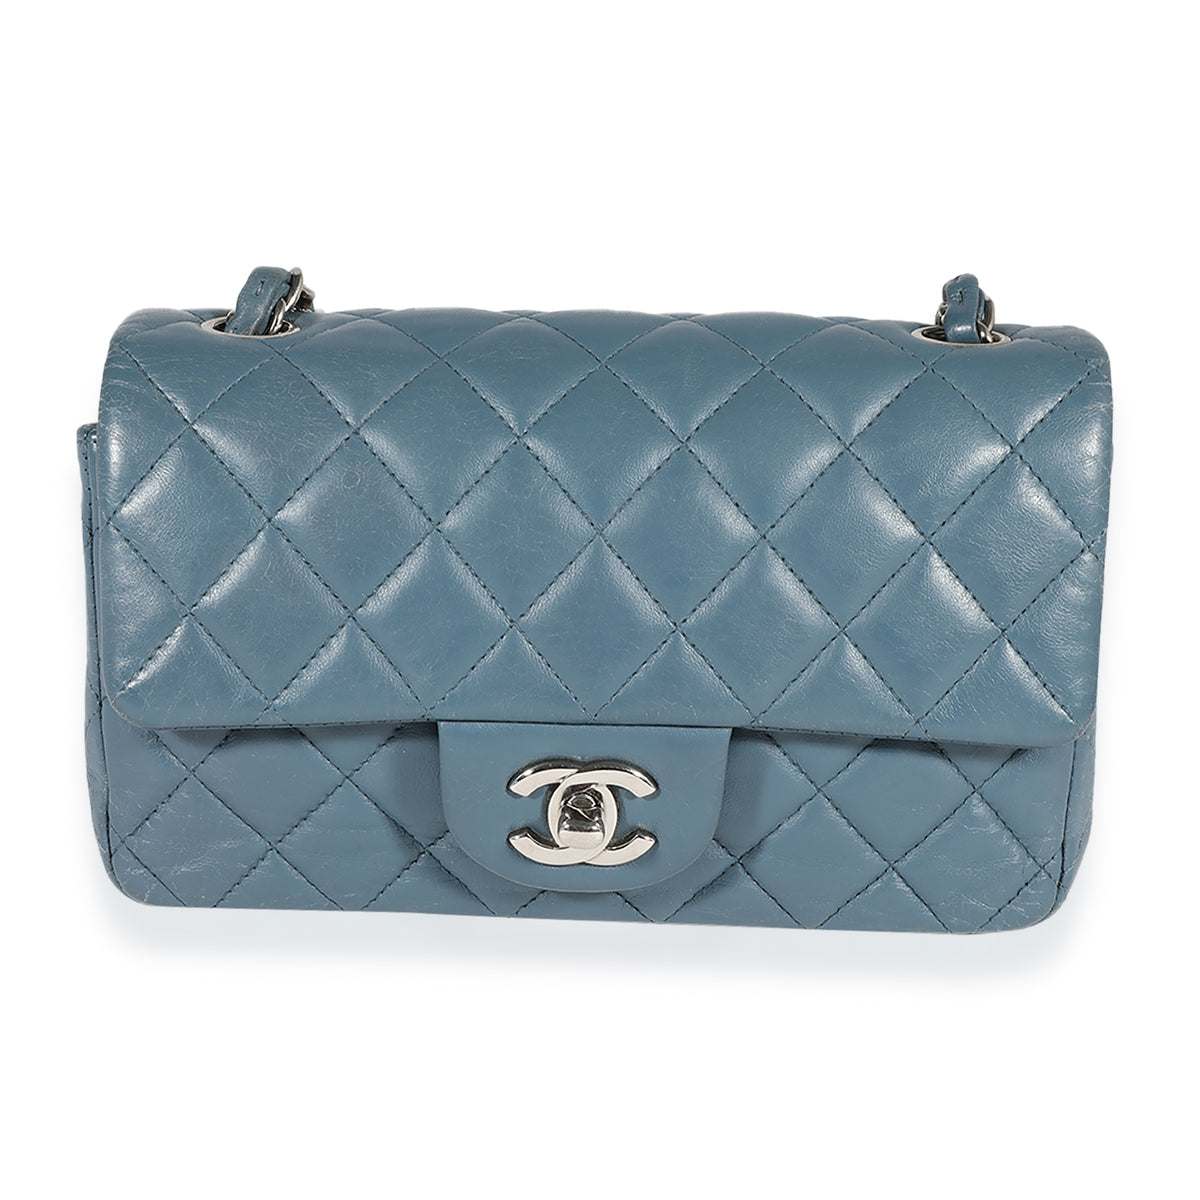 Chanel Navy Blue Quilted Lambskin Leather Small Trendy CC Flap Top